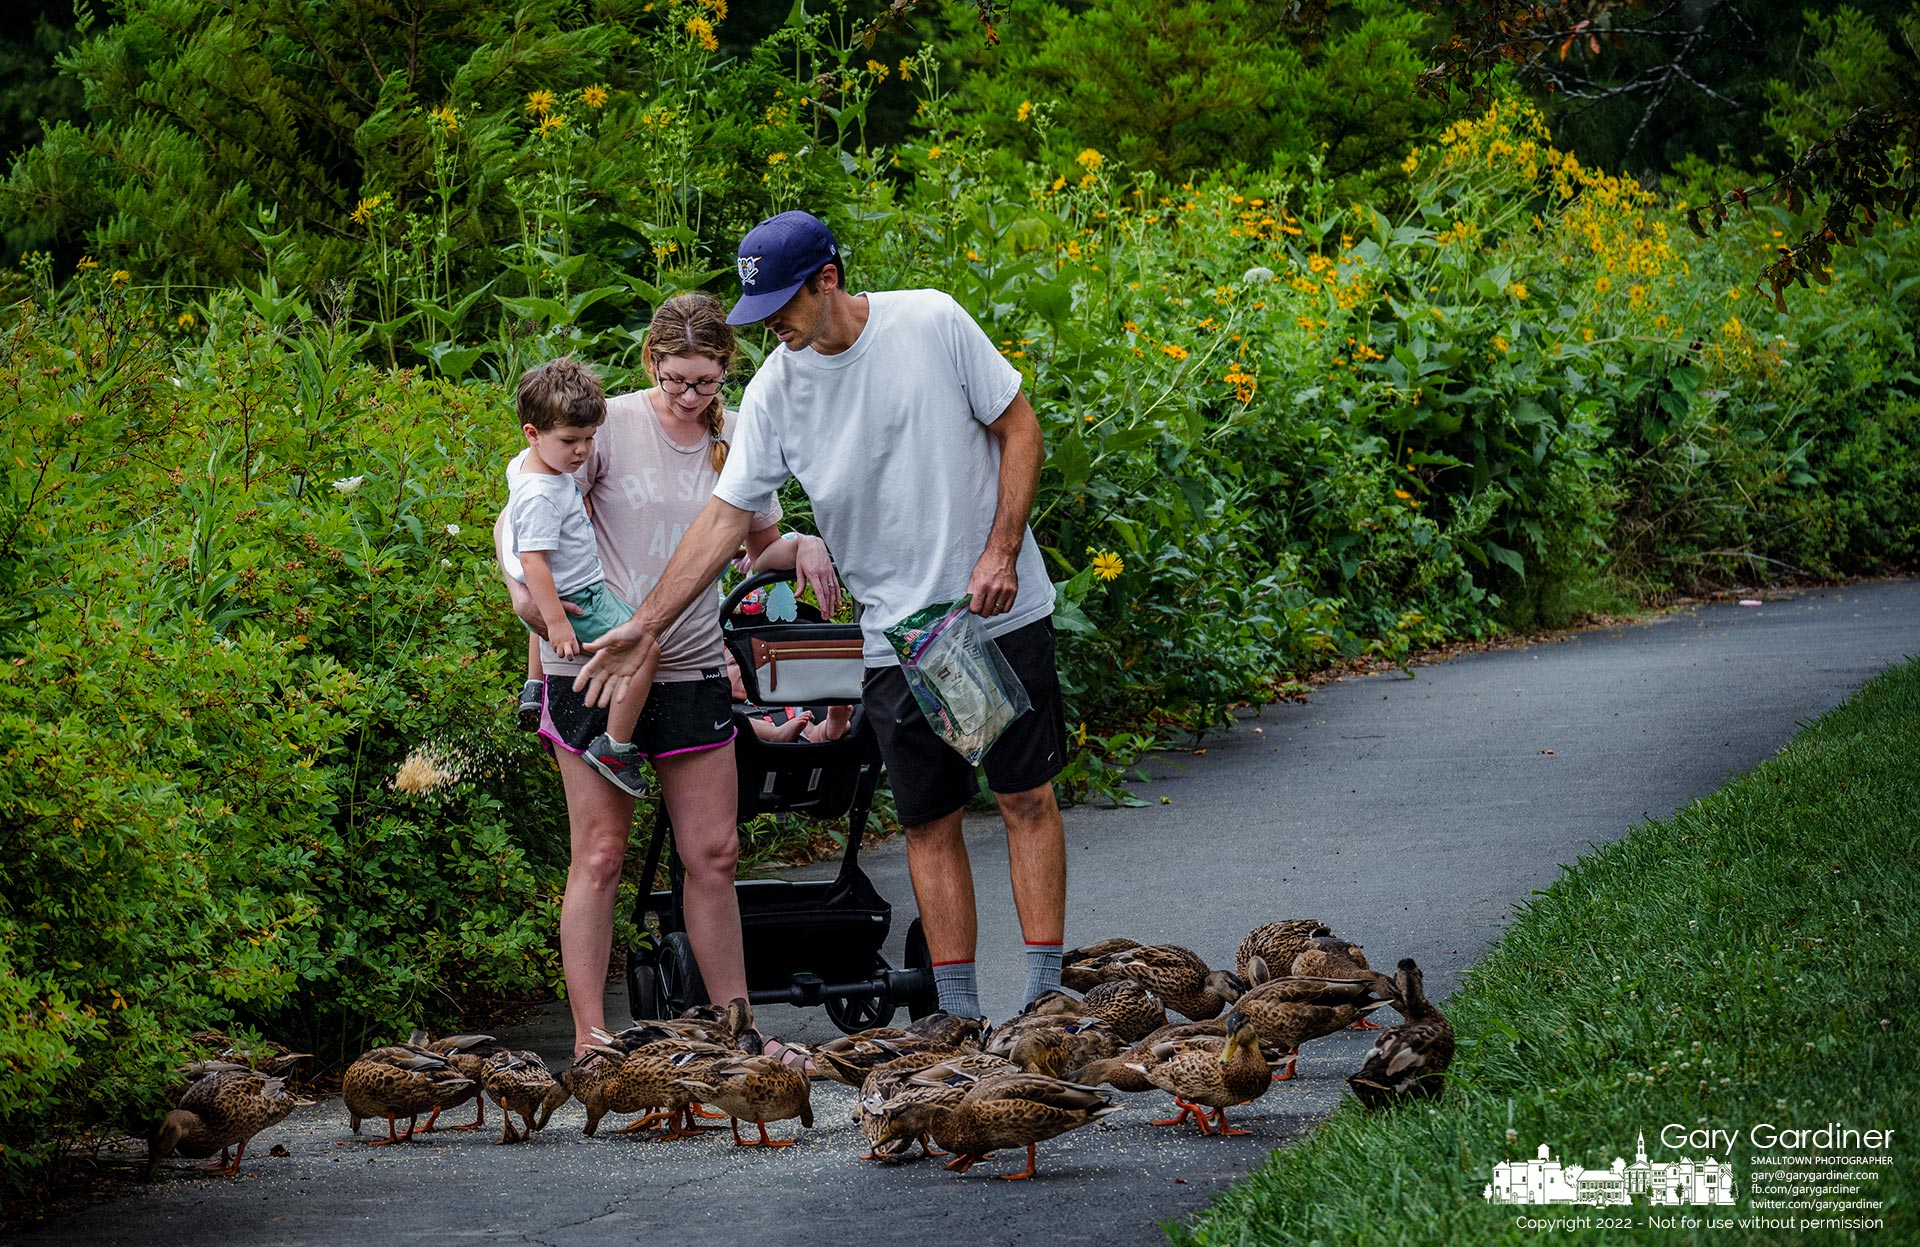 A family stops their walk along the path at the wetlands at Highlands to feed cracked corn to the ducks. My Final Photo for July 24, 2022.